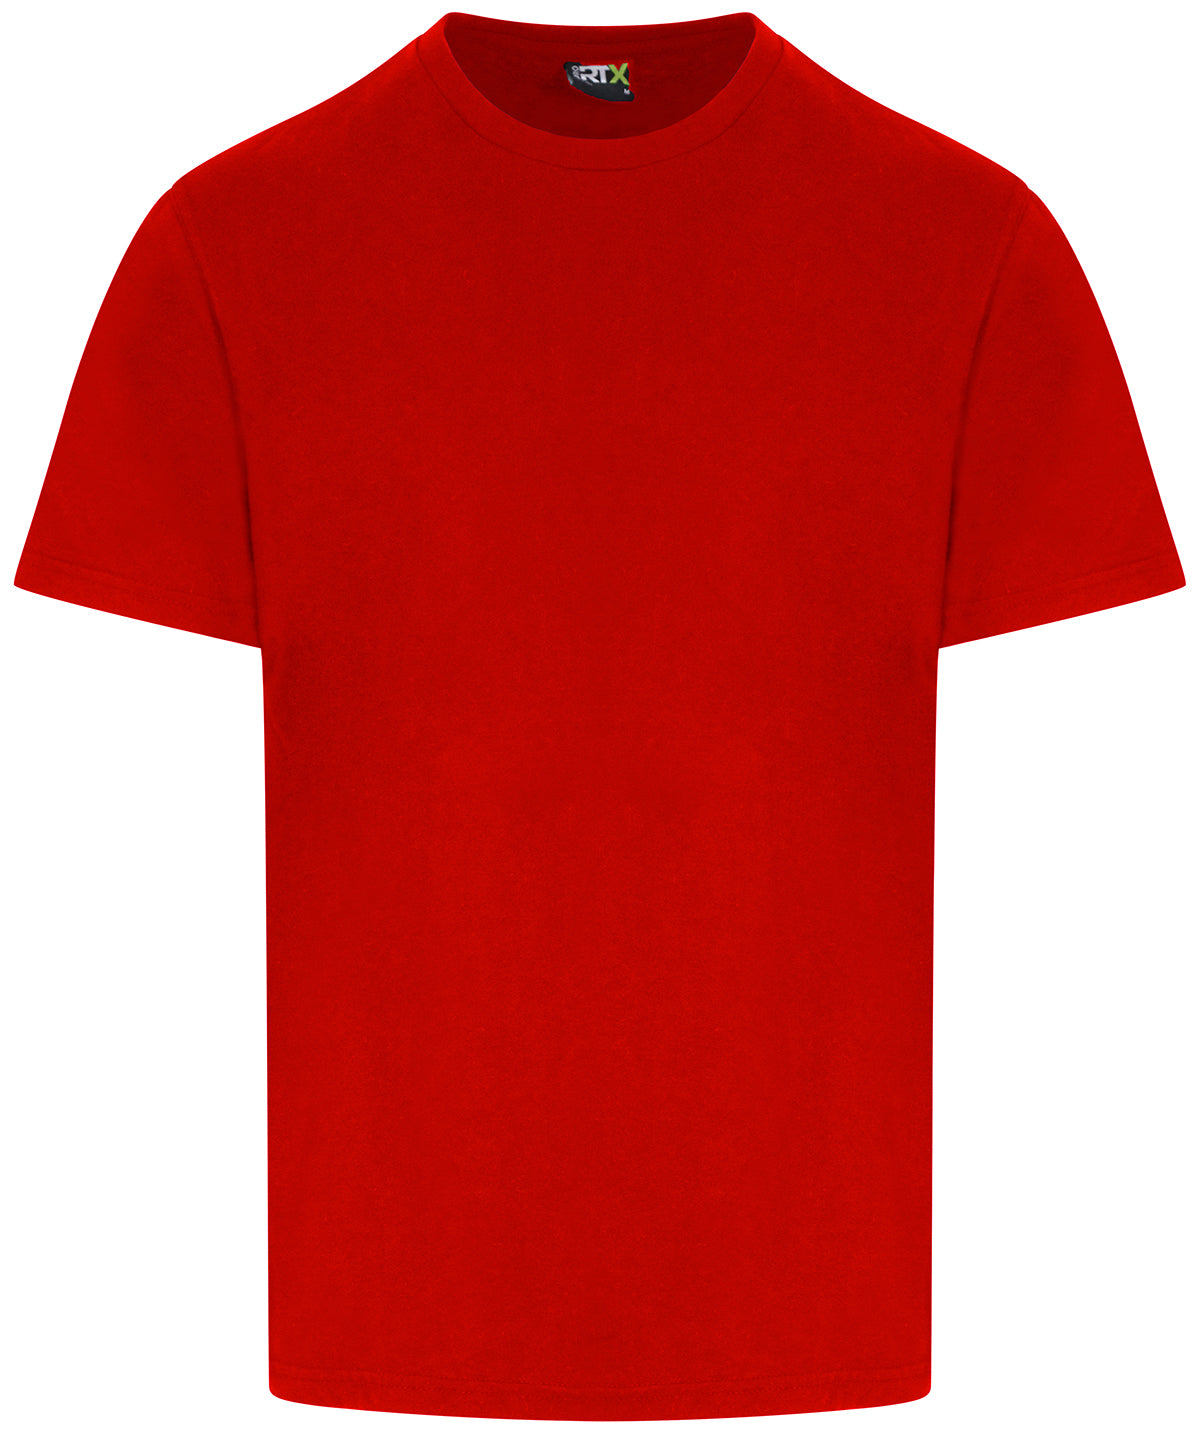 ProRTX Pro t-shirt Red